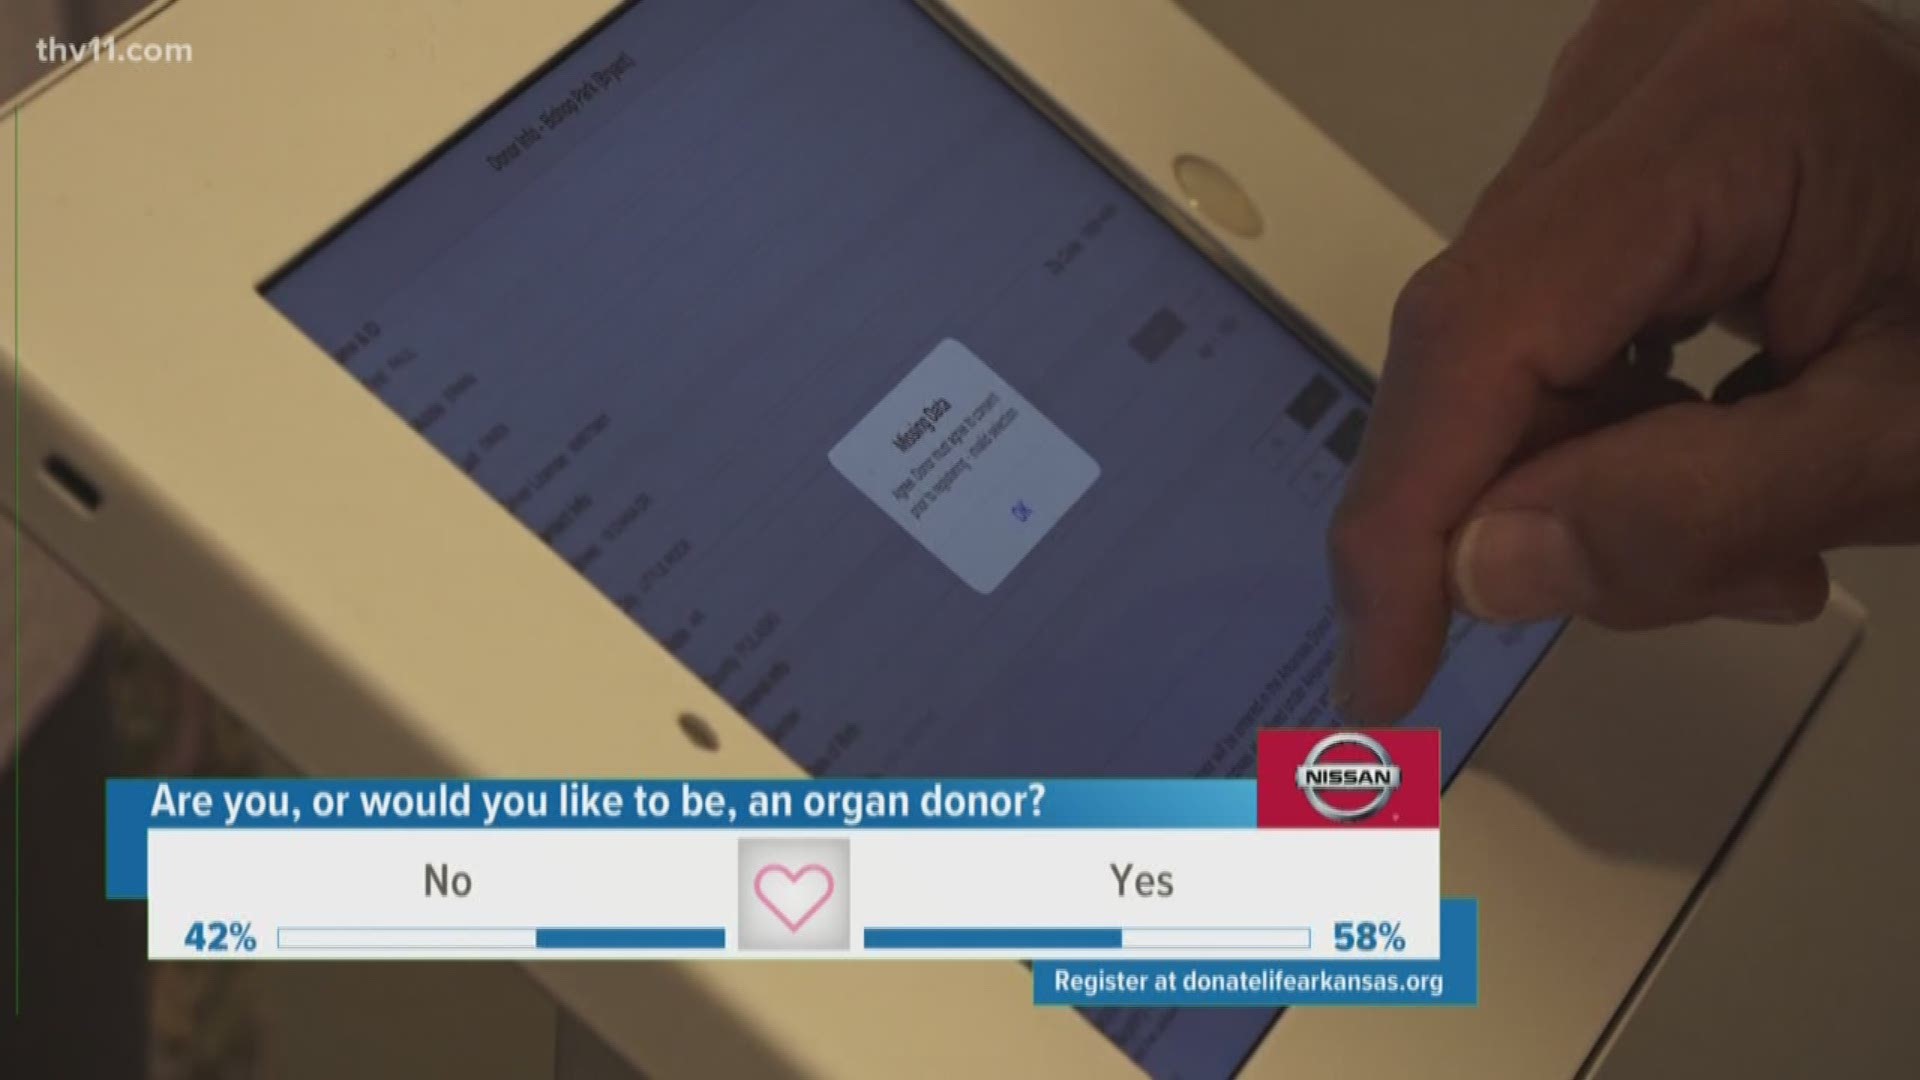 Organizations work to restore lives through organ and tissue donation. But to succeed, more donors are needed. That's why ARORA created these new kiosks.